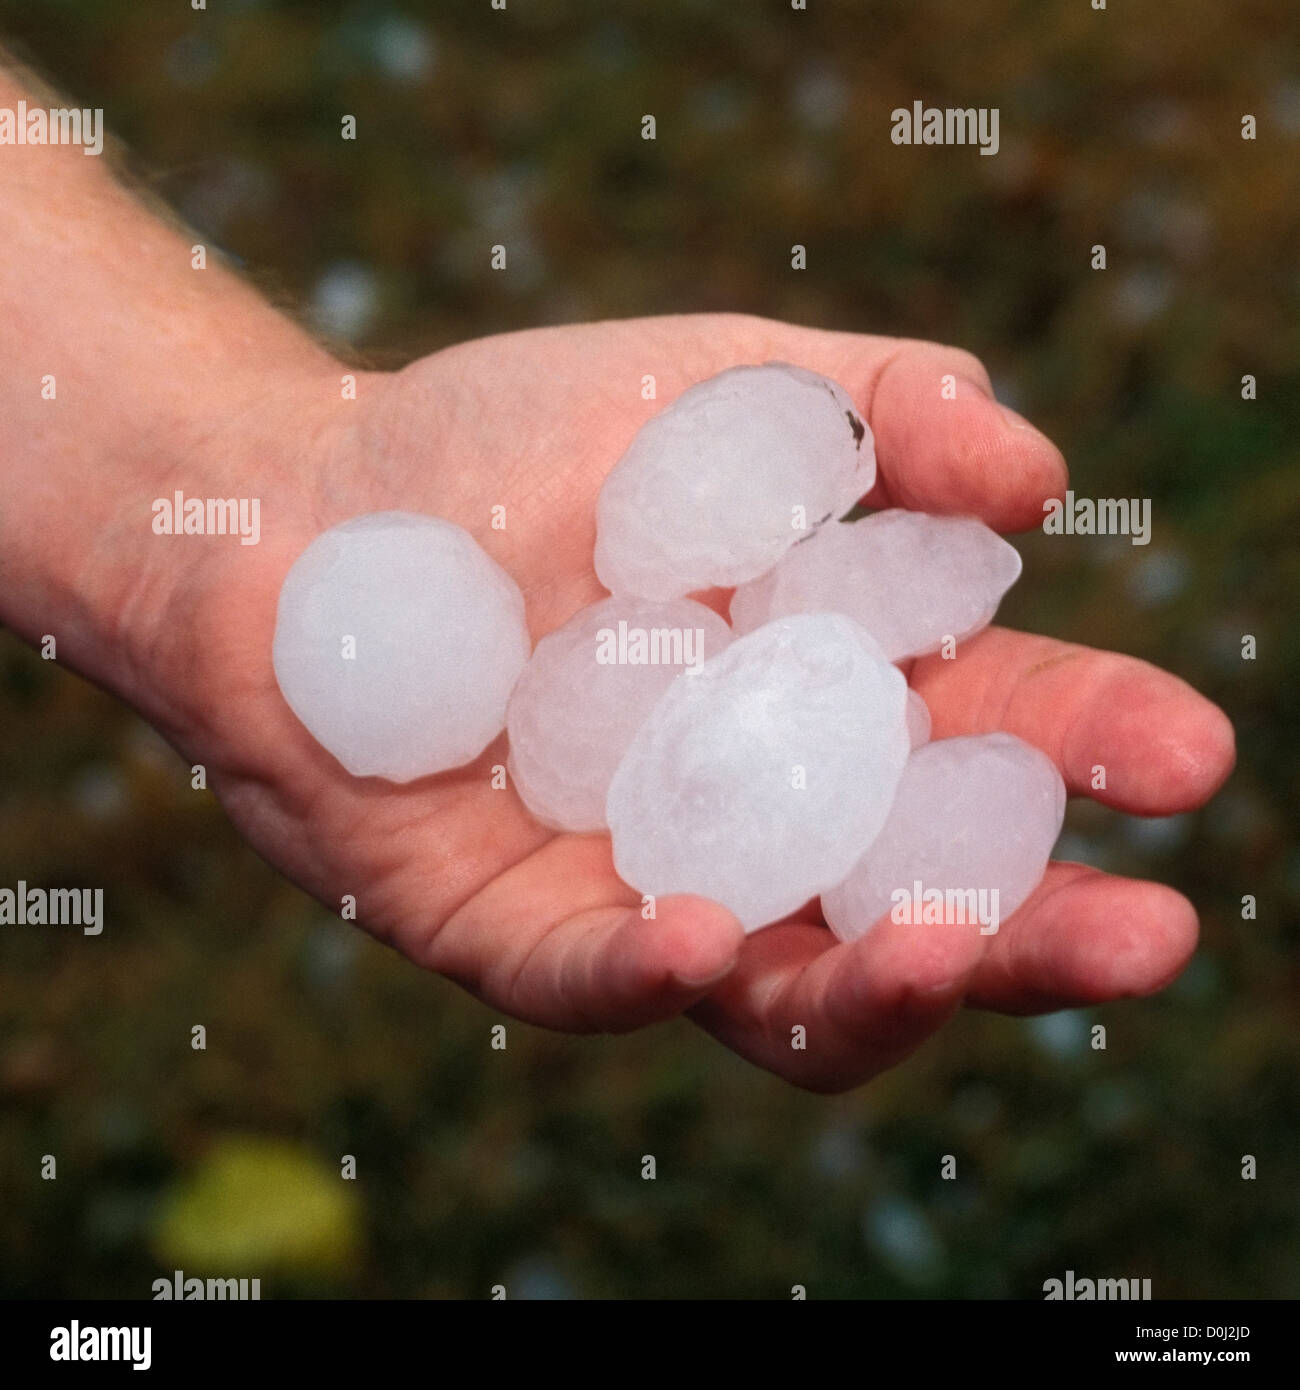 A Man Holds a Collection of Golfball Sized Hailstones Stock Photo